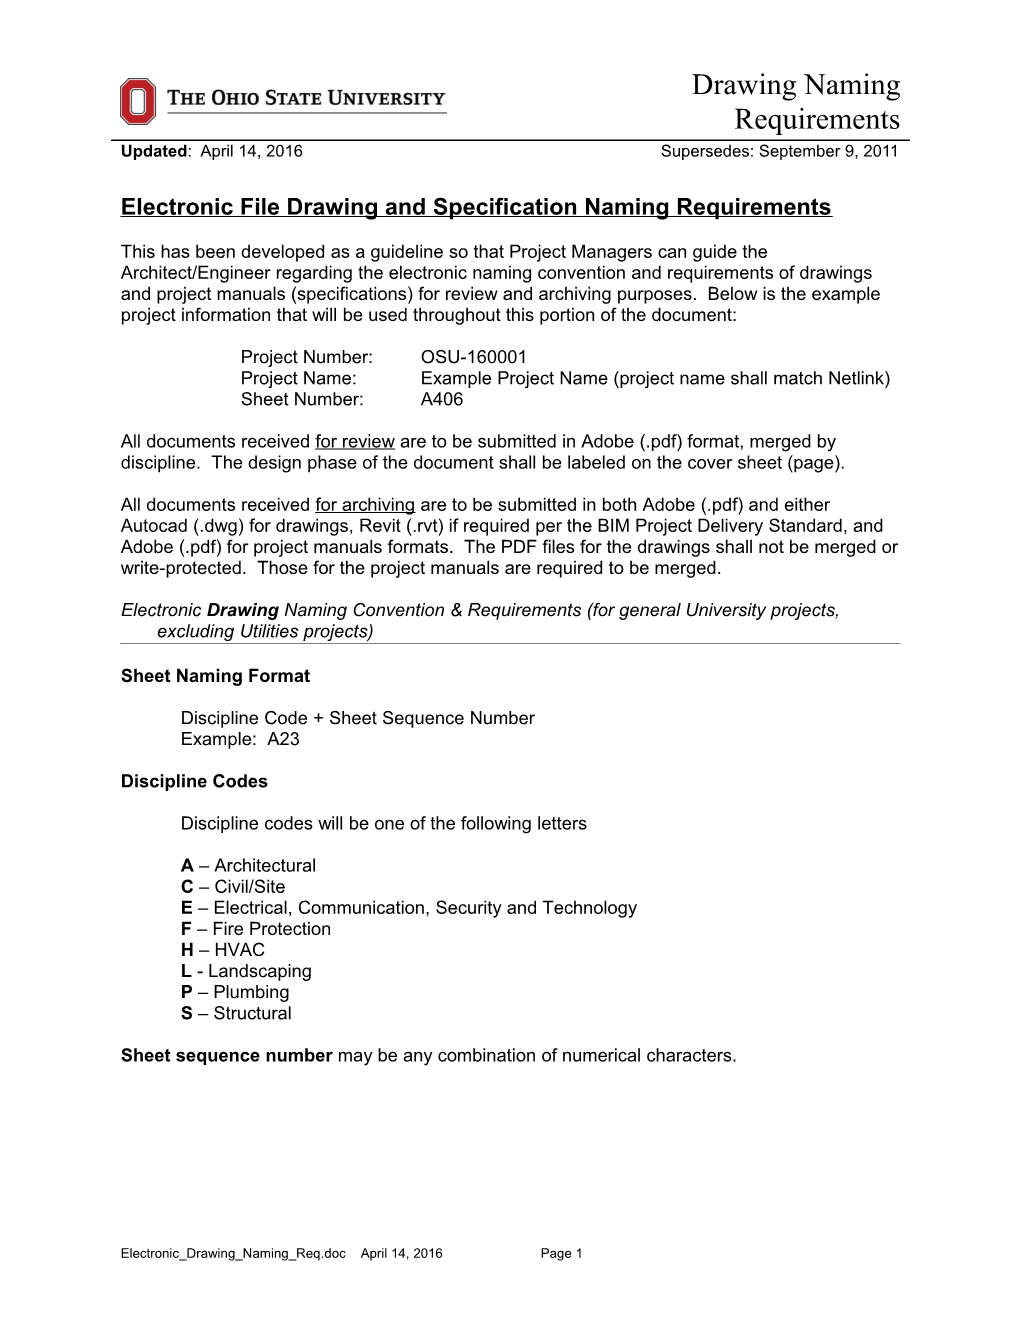 Electronic File Drawing and Specification Naming Requirements